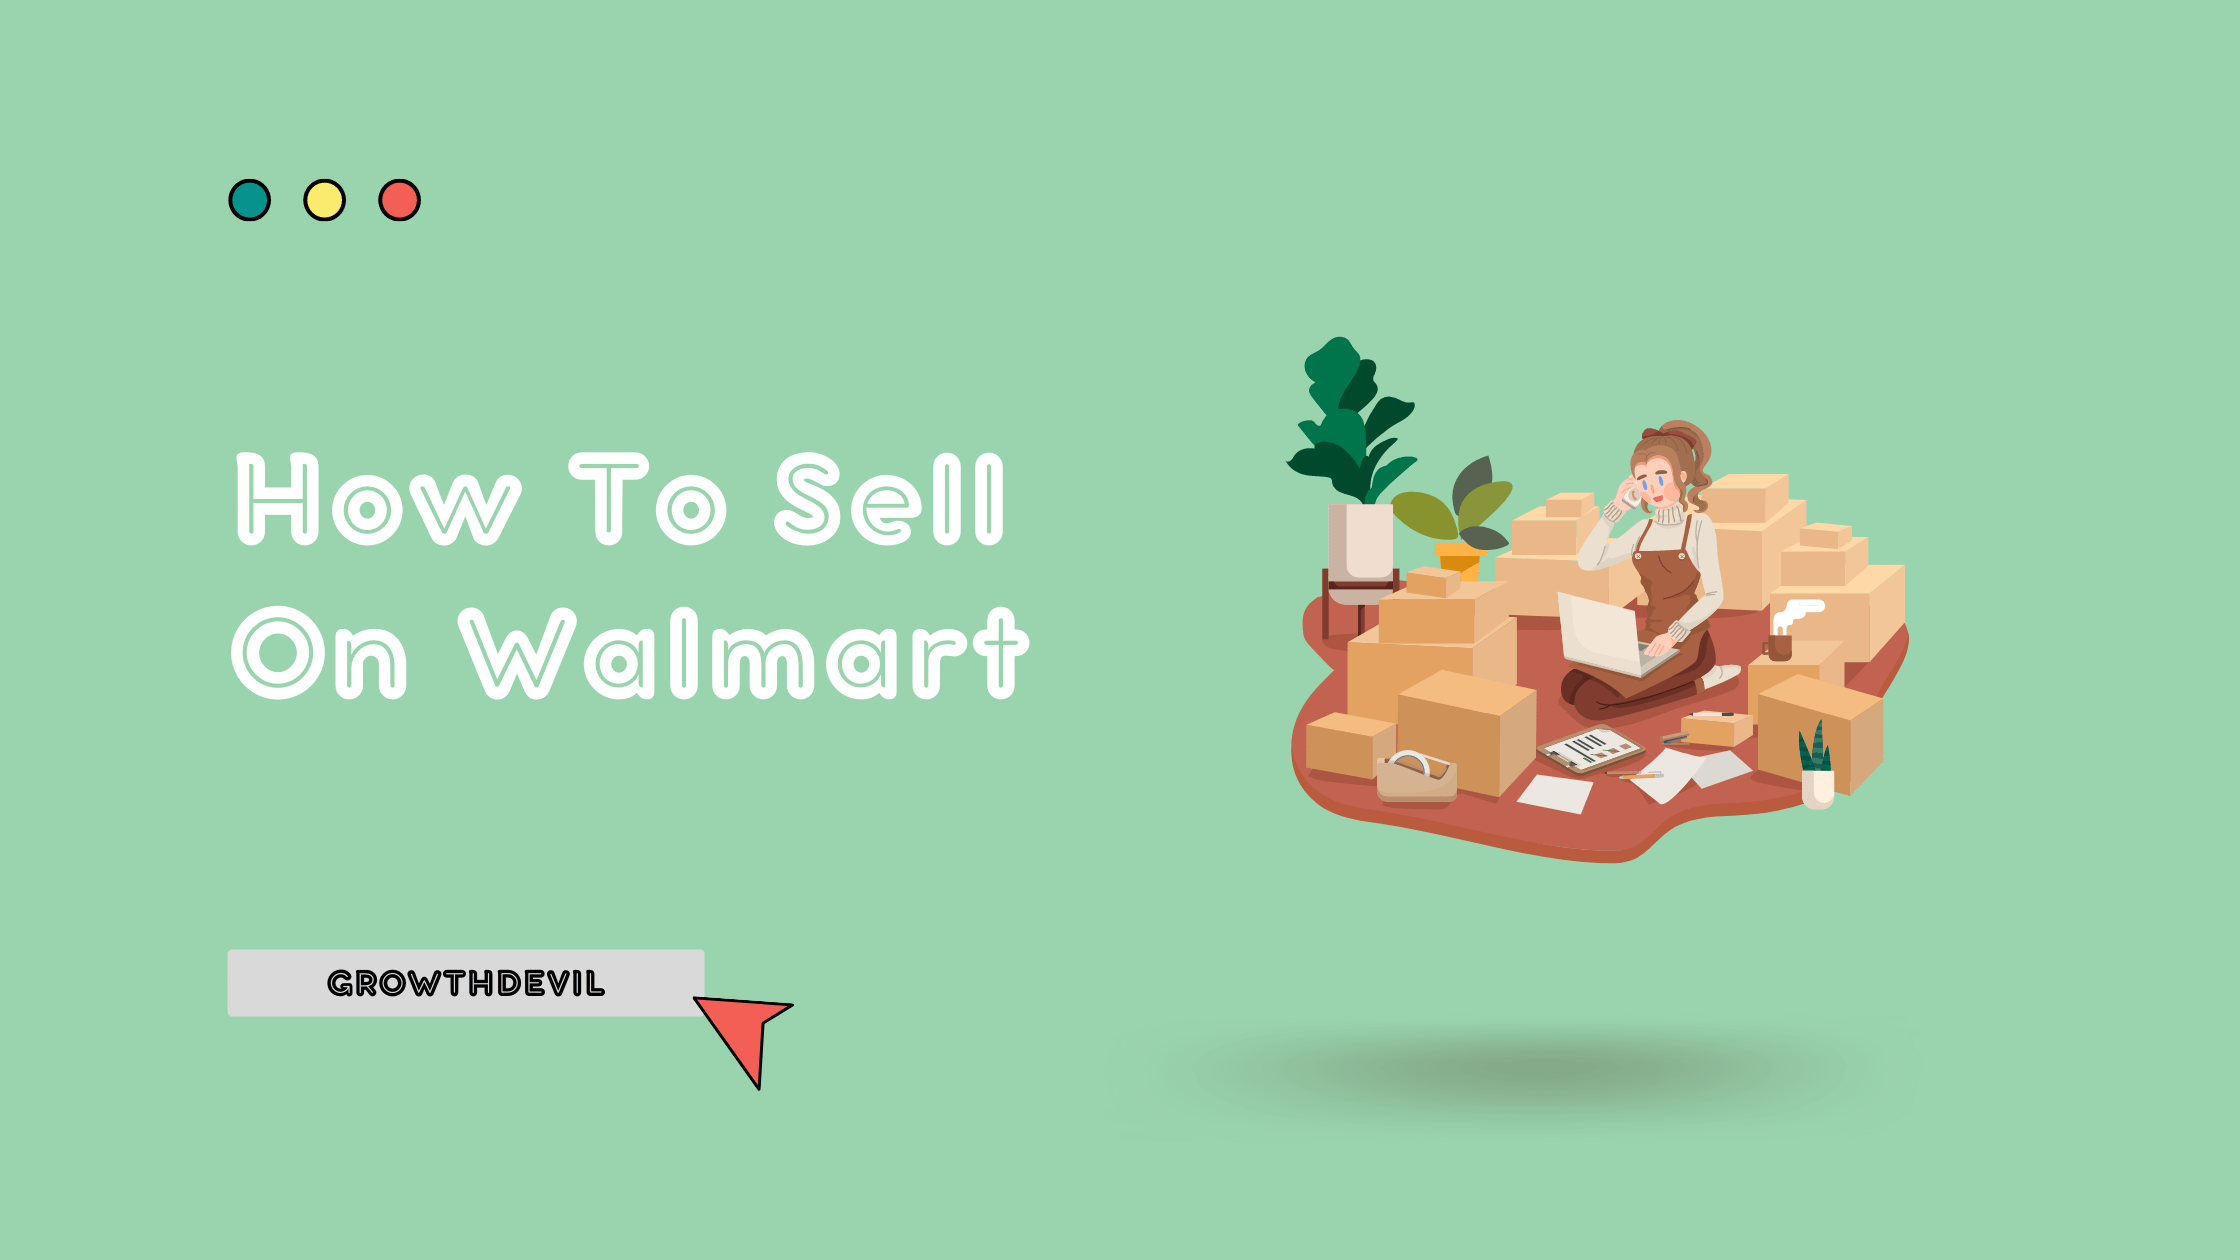 How To Sell On Walmart - GrowthDevil